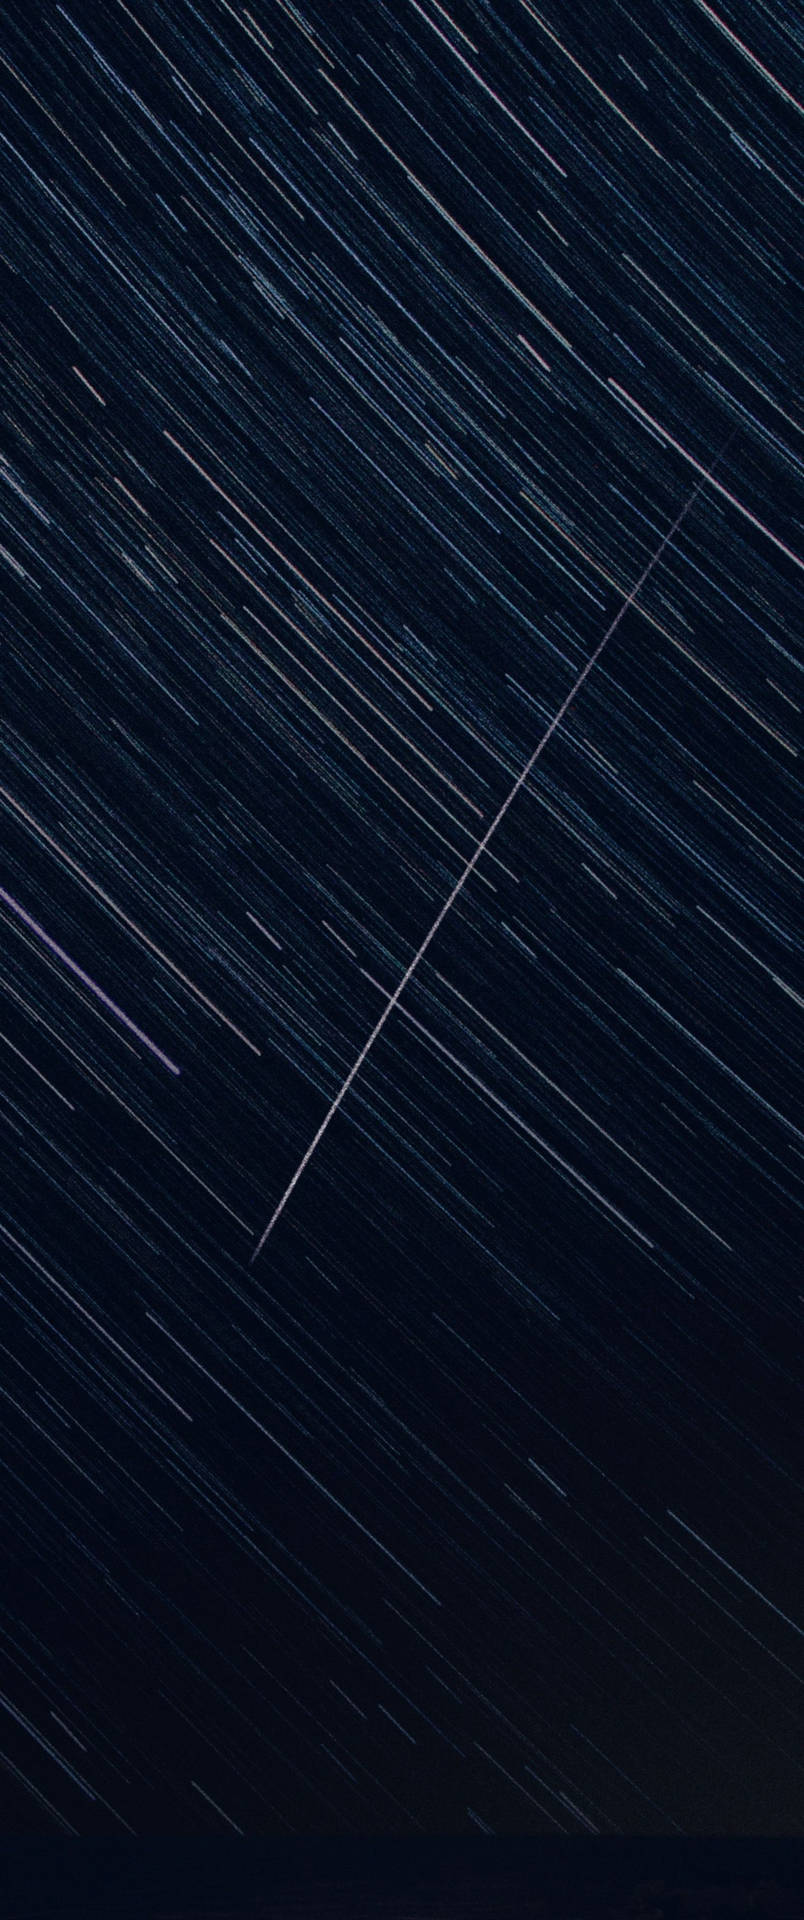 Vertical Shooting Star Background